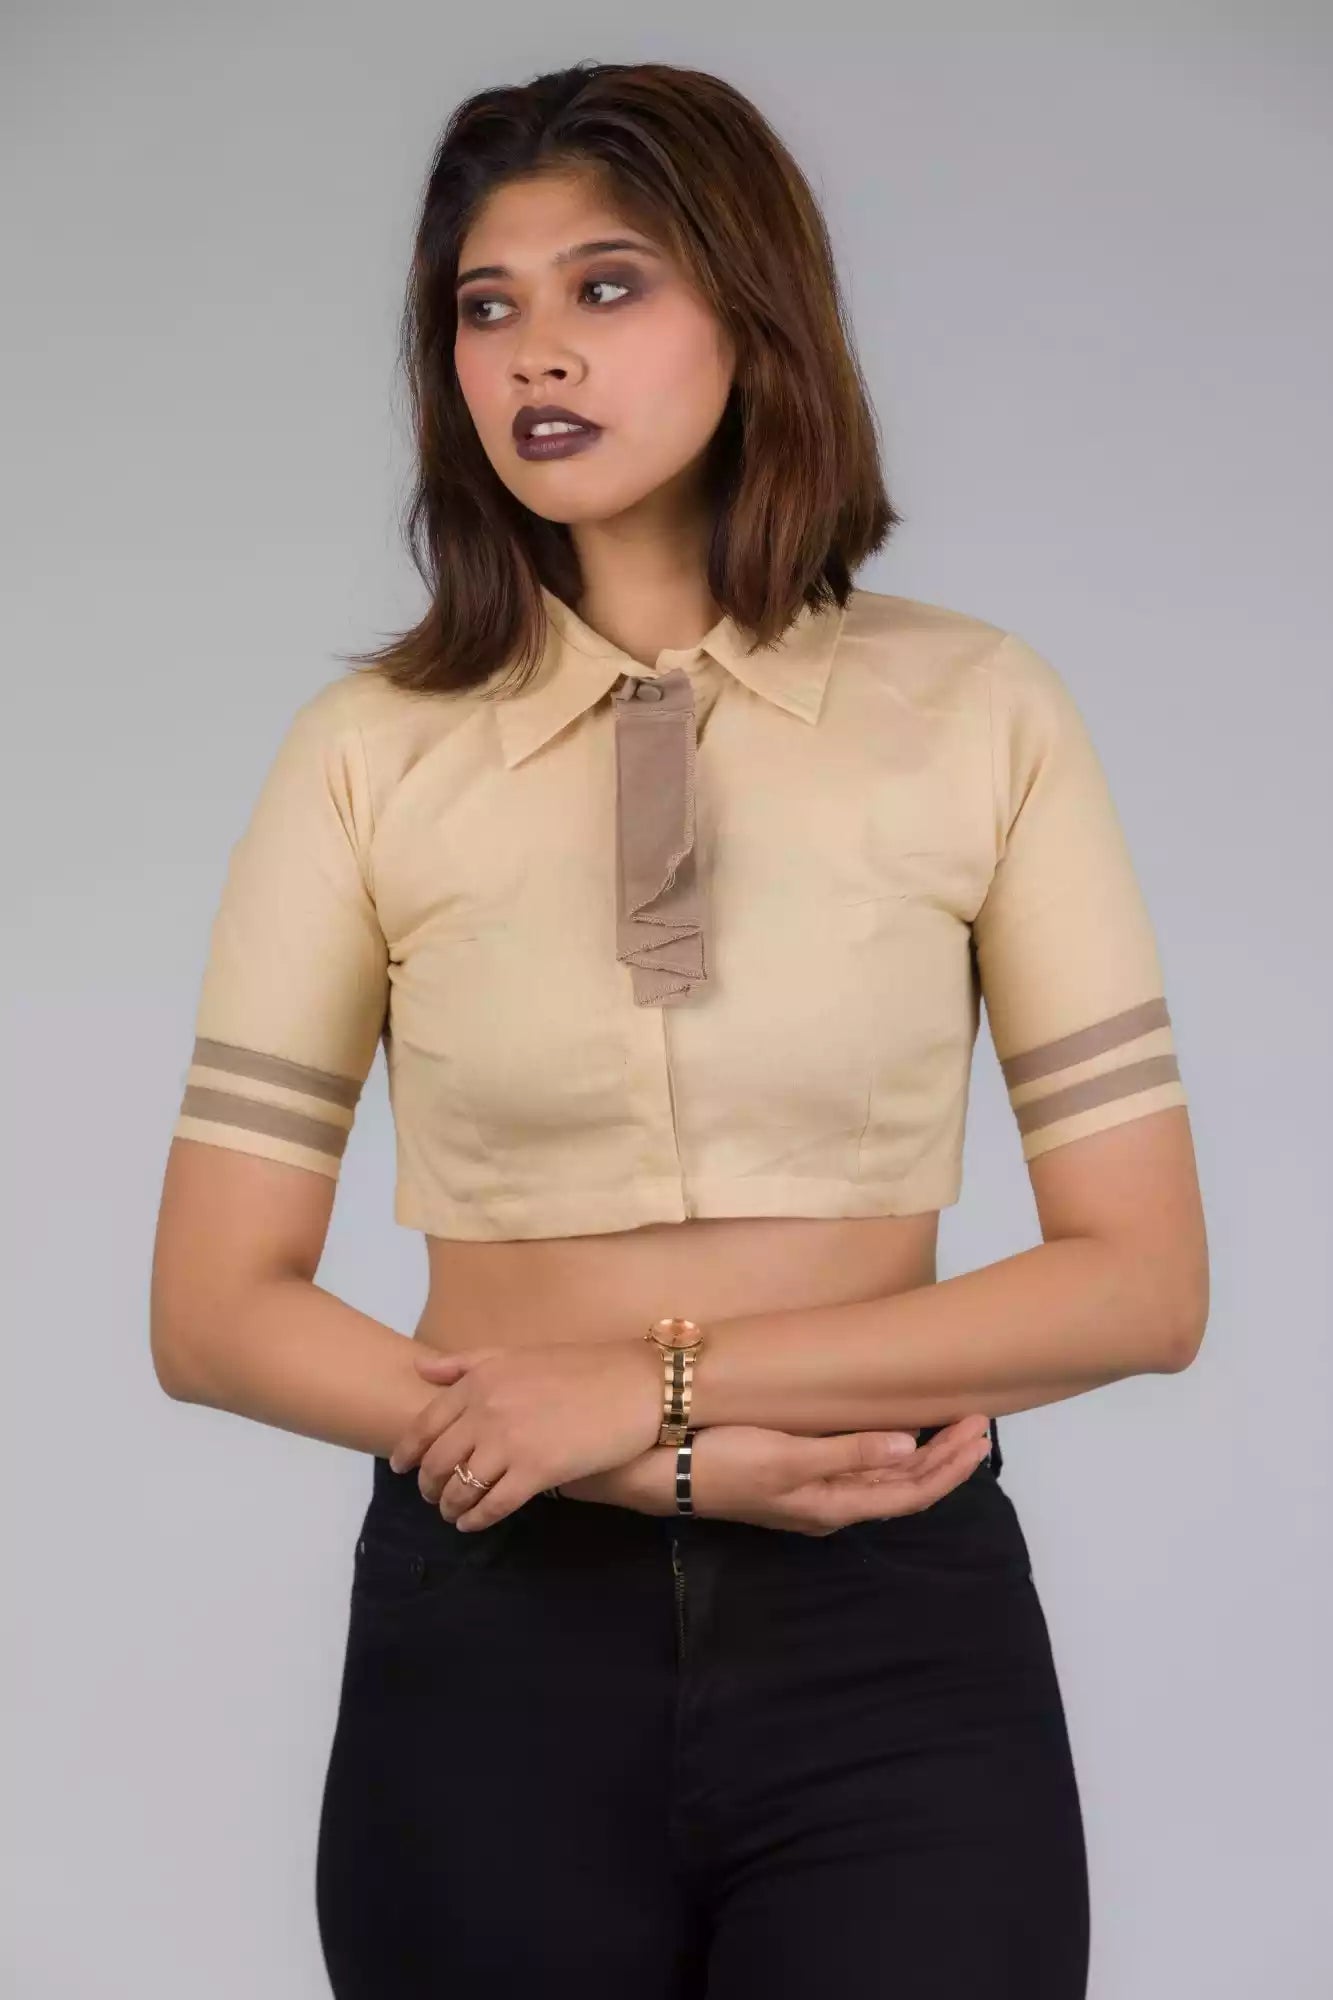 A pretty lady in Light Beige Blouse with removeable Brown tie In Pure Cotton, a office wear for women